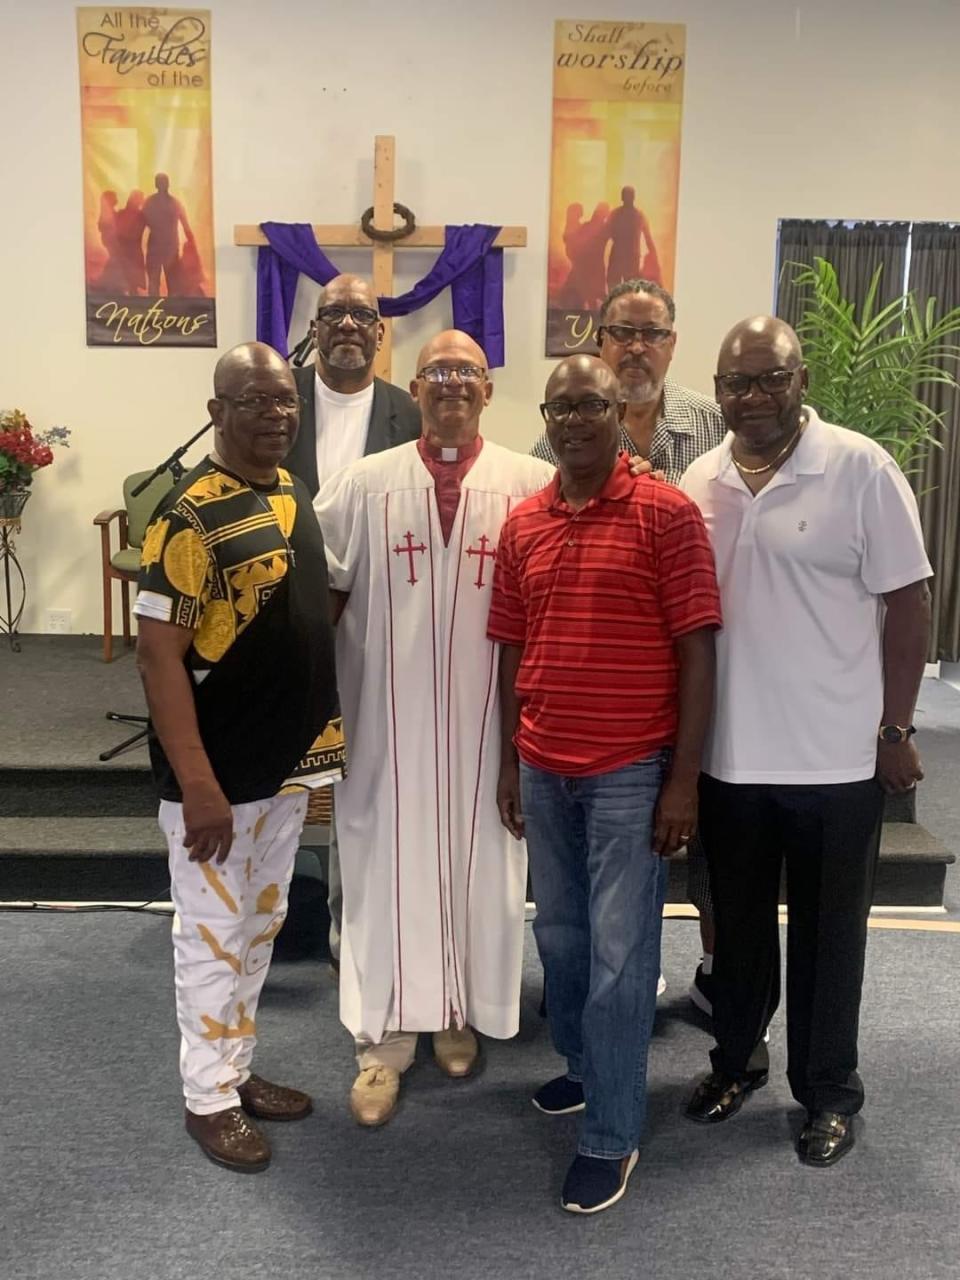 Drill team members as they looked during a recent reunion last fall in Winchester, Va. Pictured are, first row, left to right, Roger Cook, the Rev. Alvin Jerry Walker, Alexander "JP" Pugh Jr. and Anthony Kirkland; and back row, left to right, Lawrence "Bugga" Lindsay and Darryl Gibson. Cook, Walker and Pugh are all U.S. Army veterans.